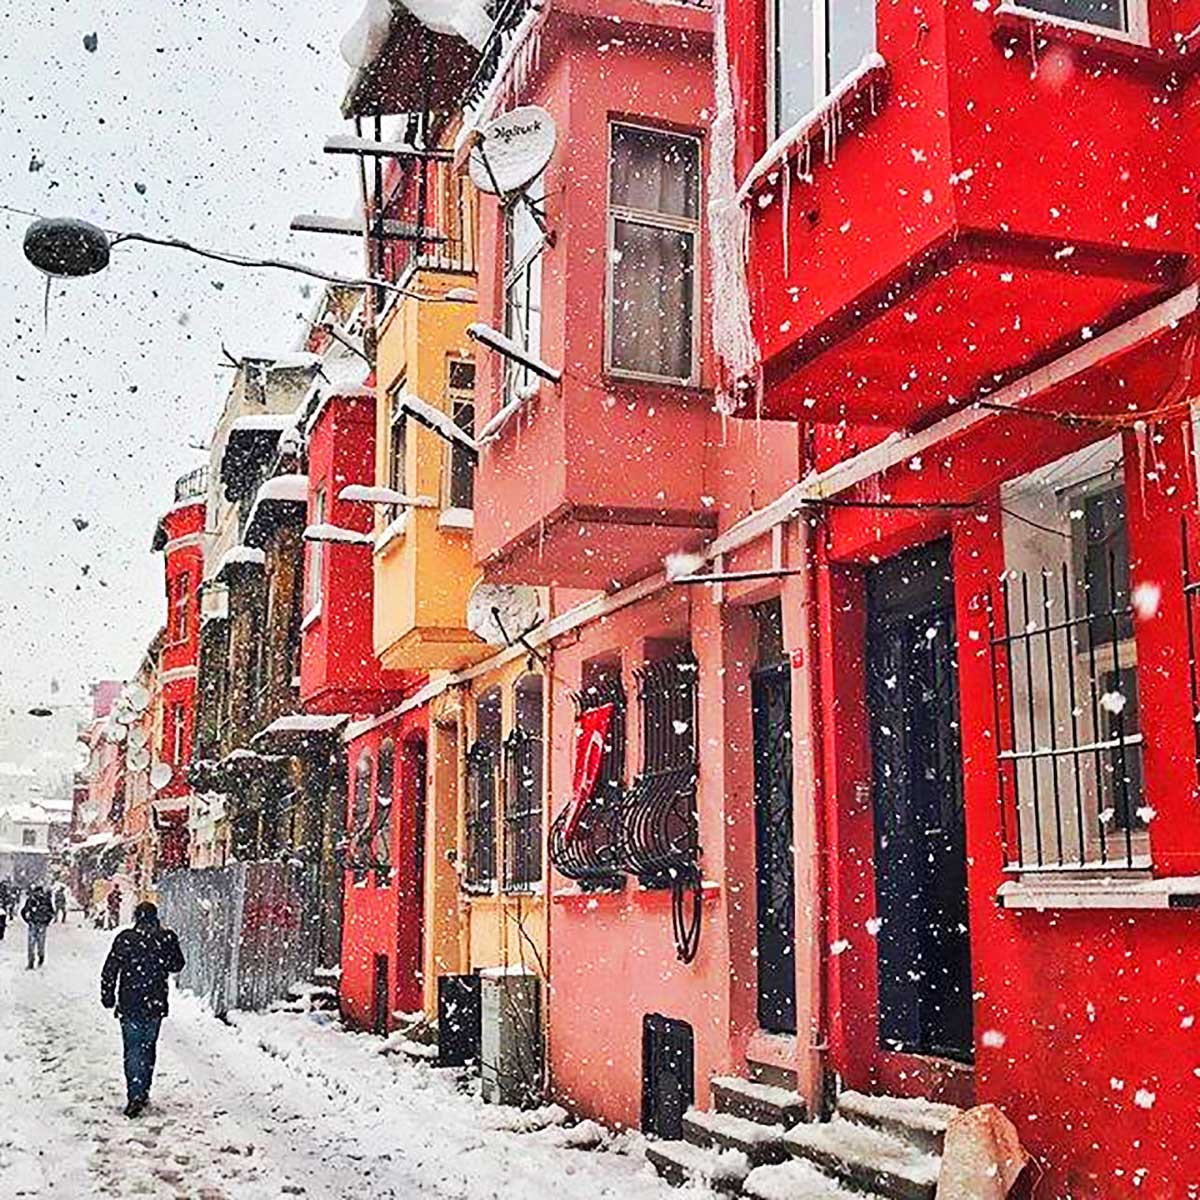 Snow Blankets Istanbul Best Snow Shots from Magical City